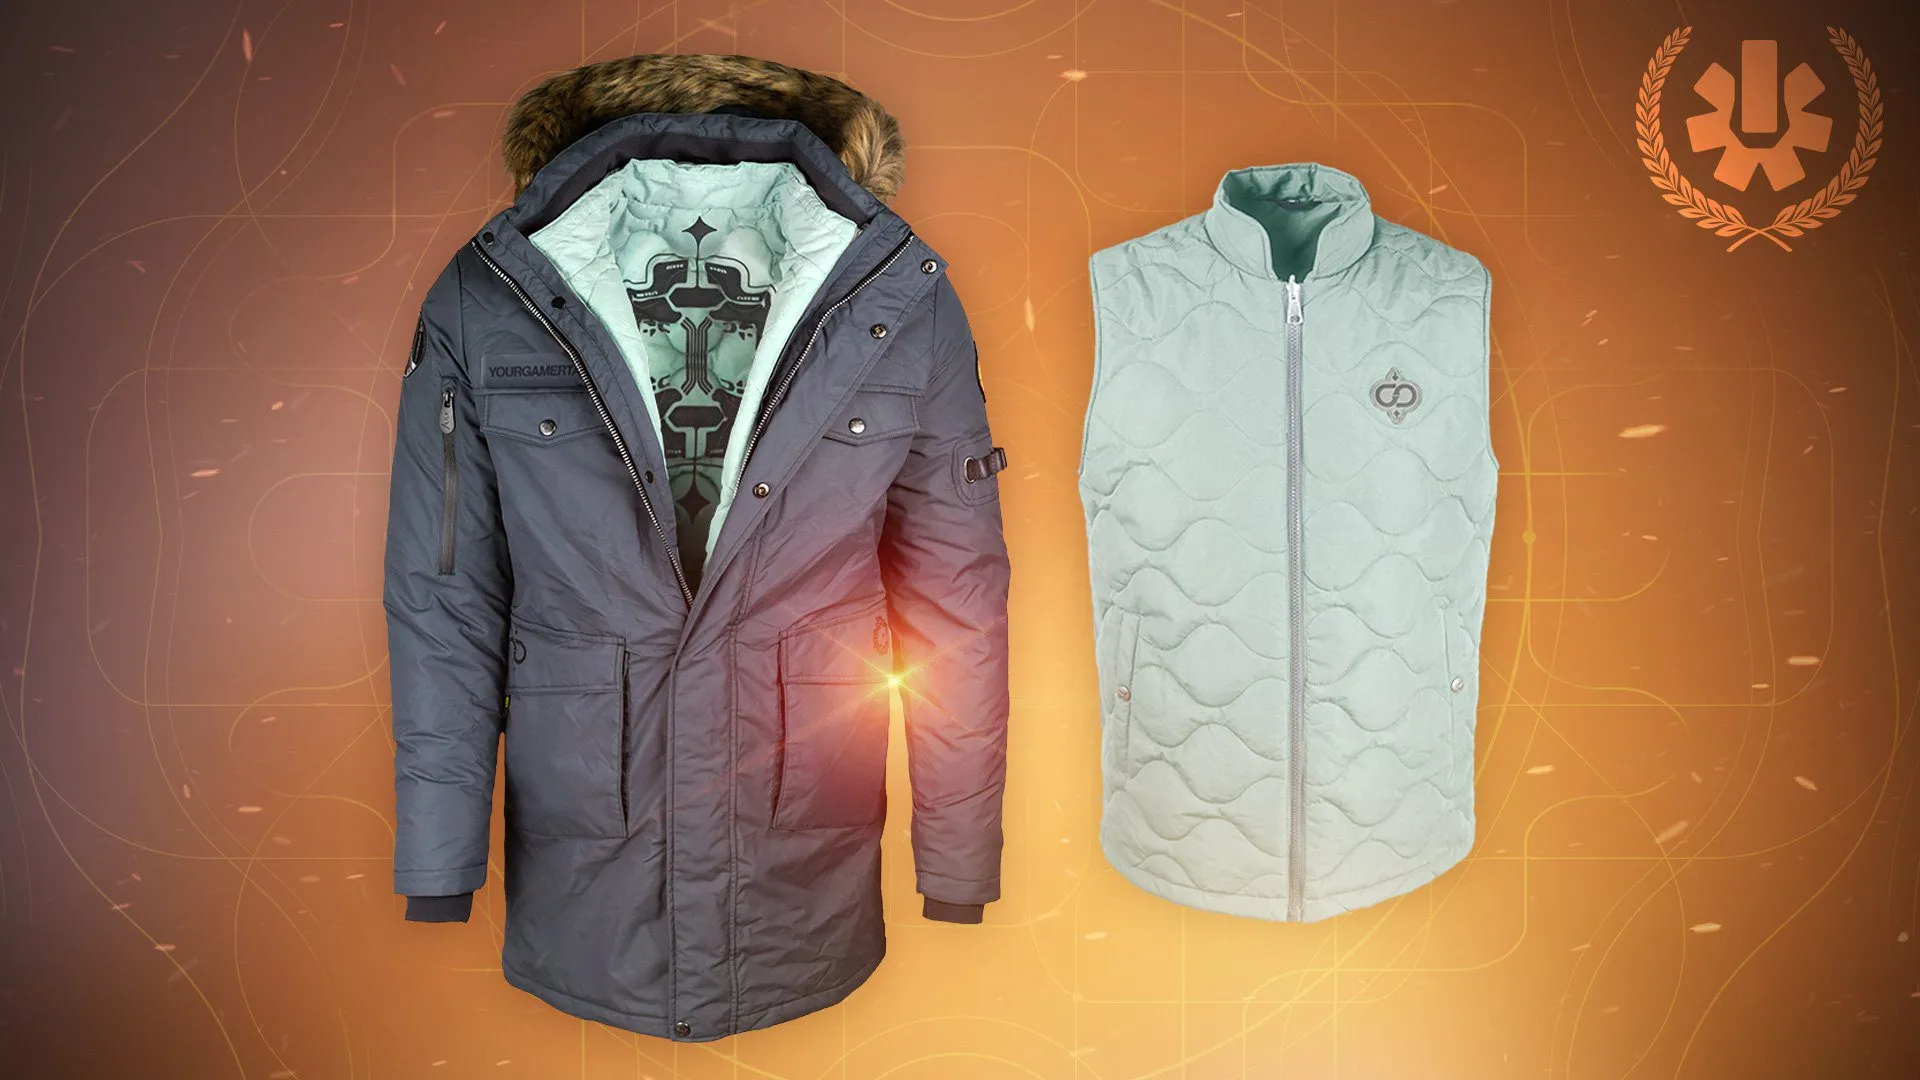 Bungie is offering a jacket if you beat the new Destiny 2 raid by